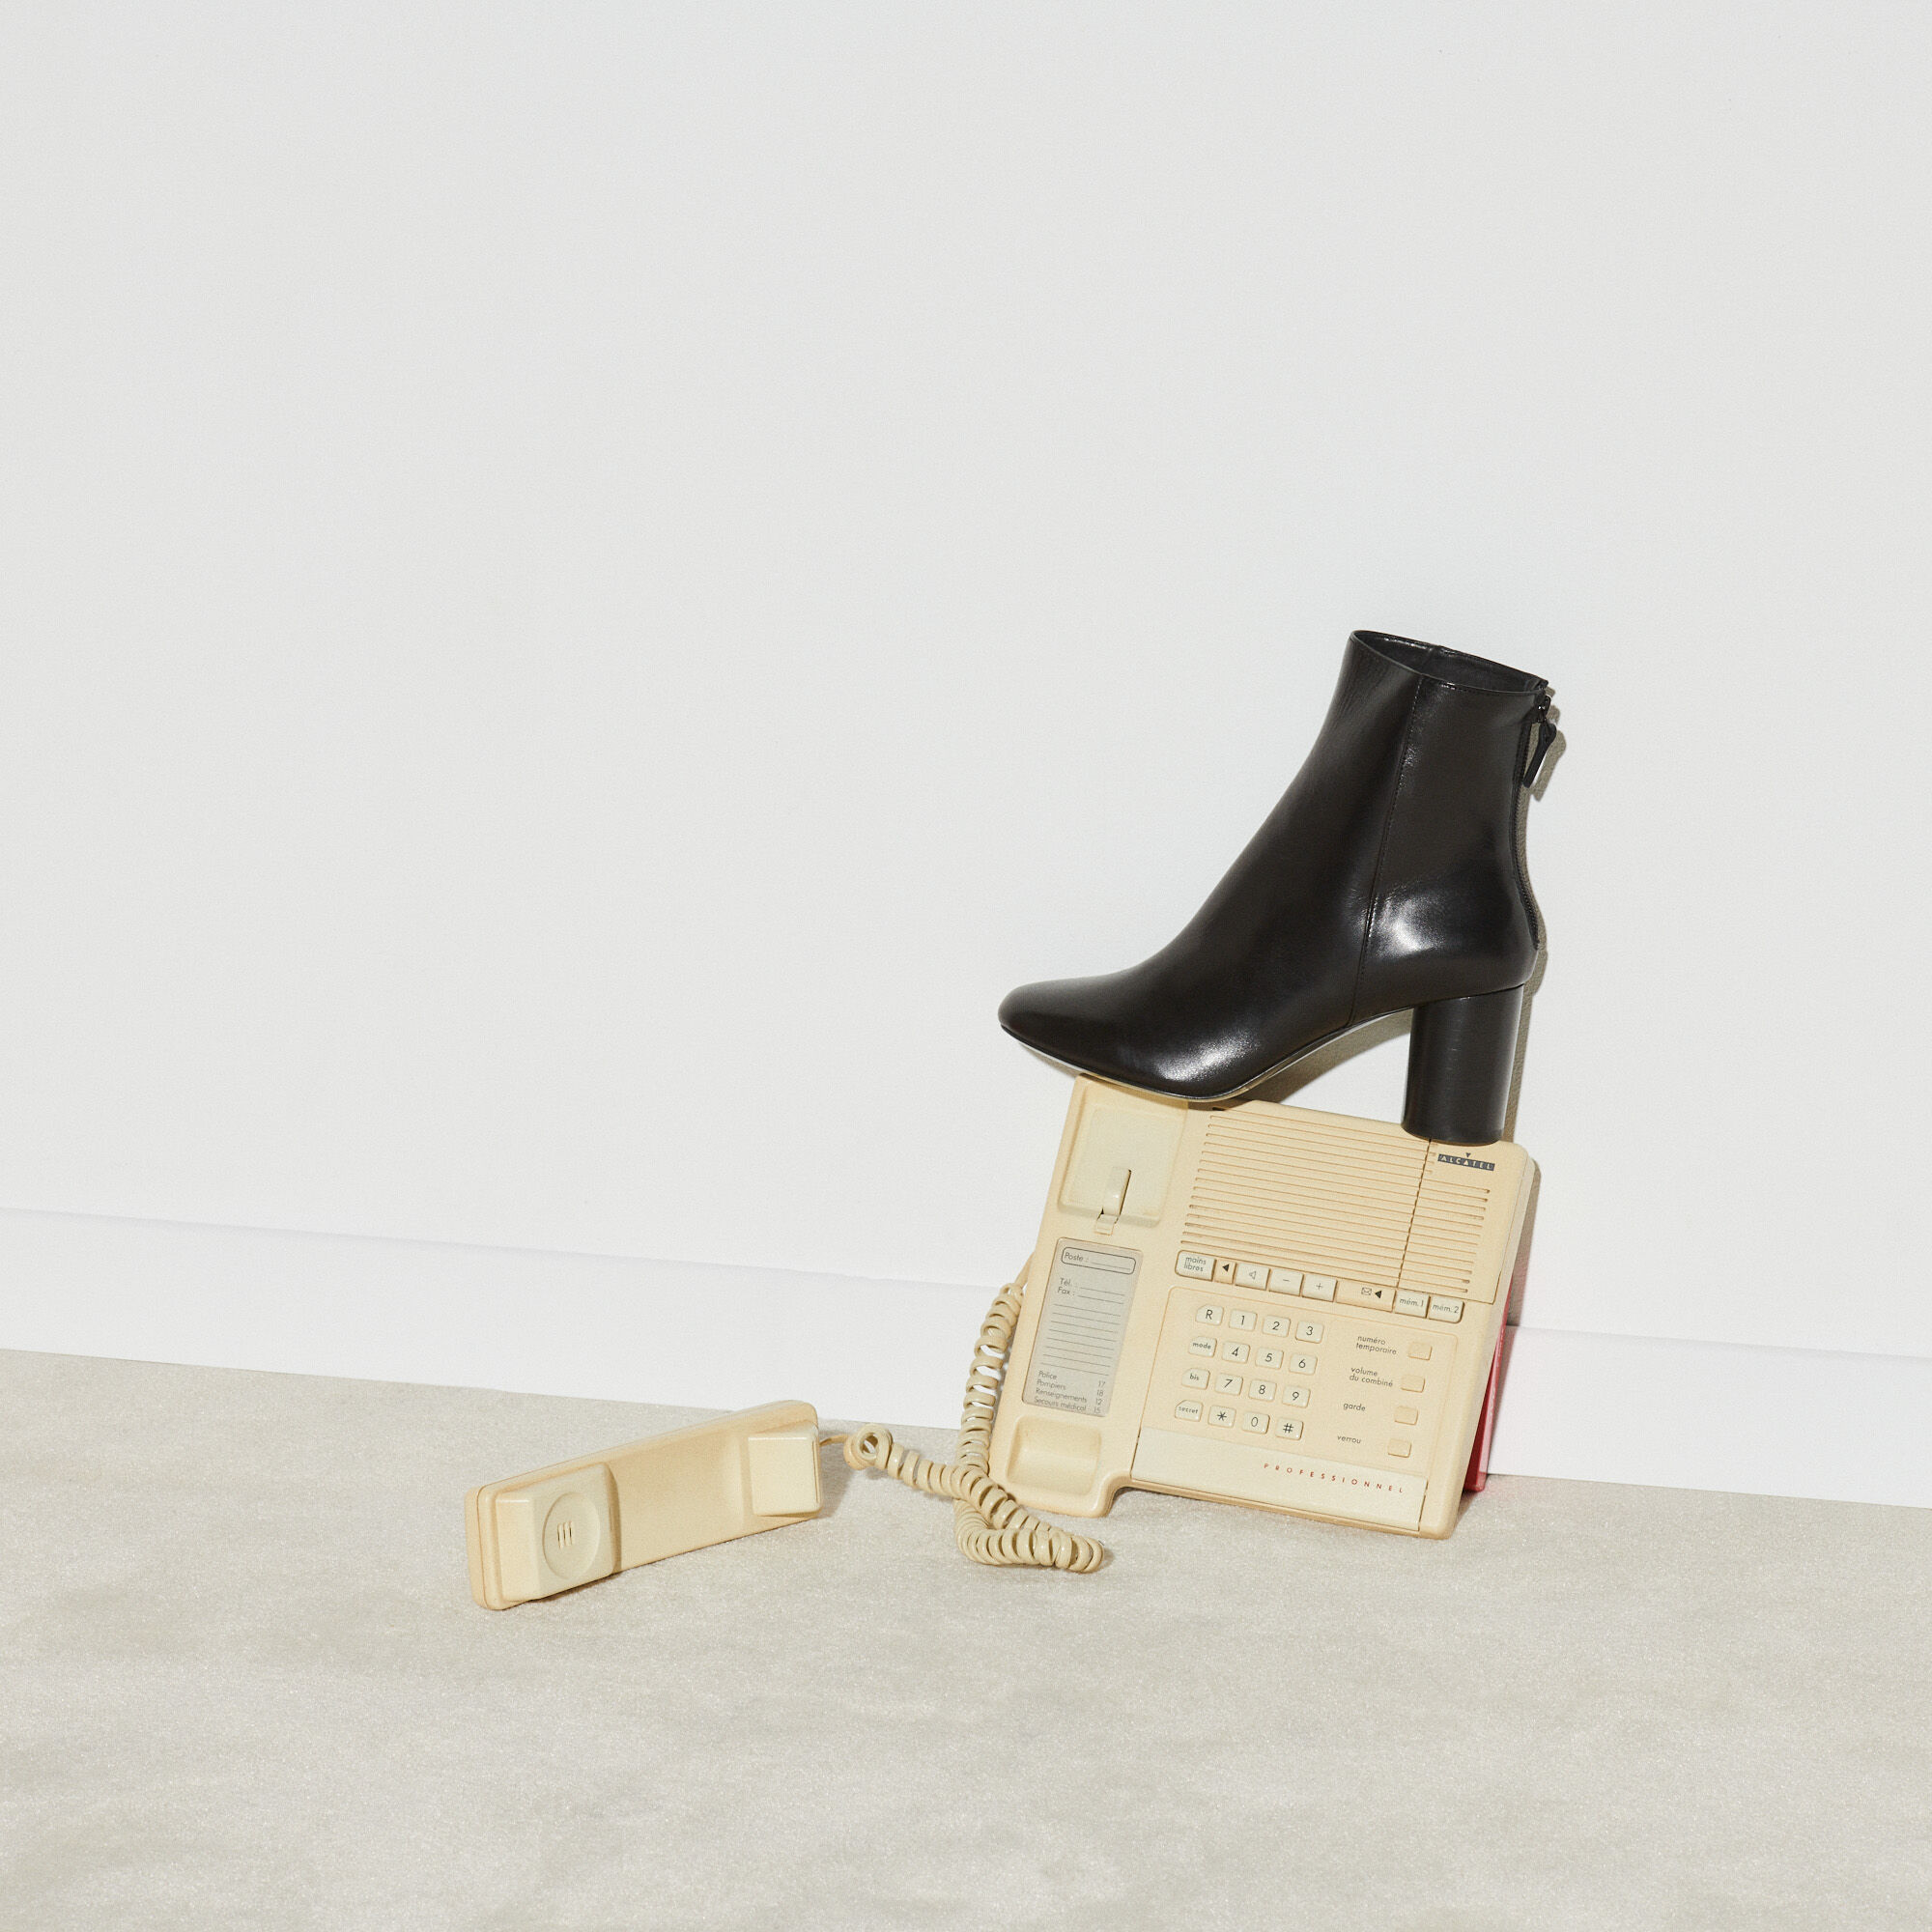 sandro leather ankle boots